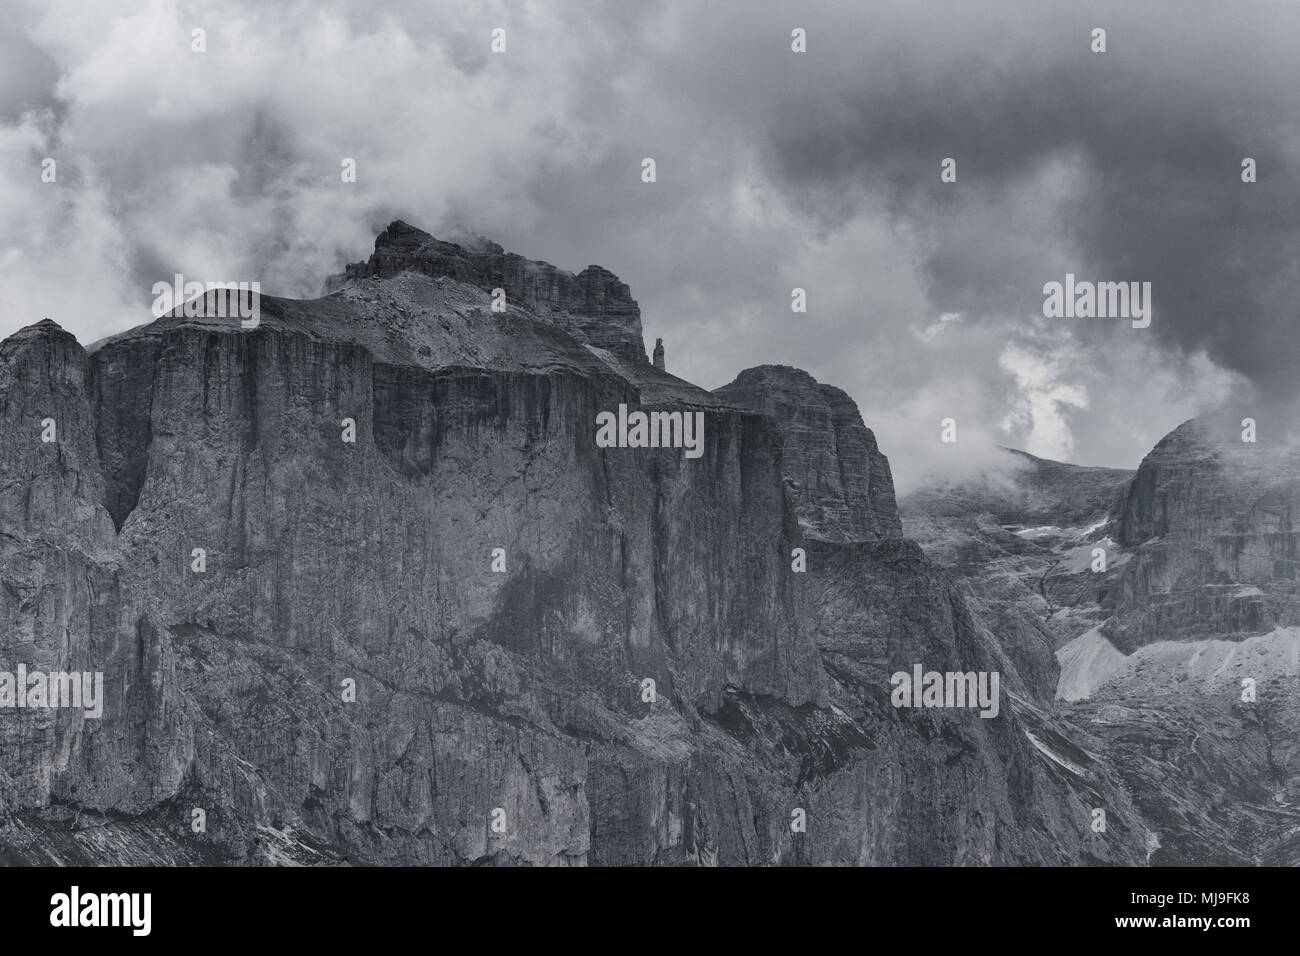 Crest of the mountain in the Dolomites Stock Photo